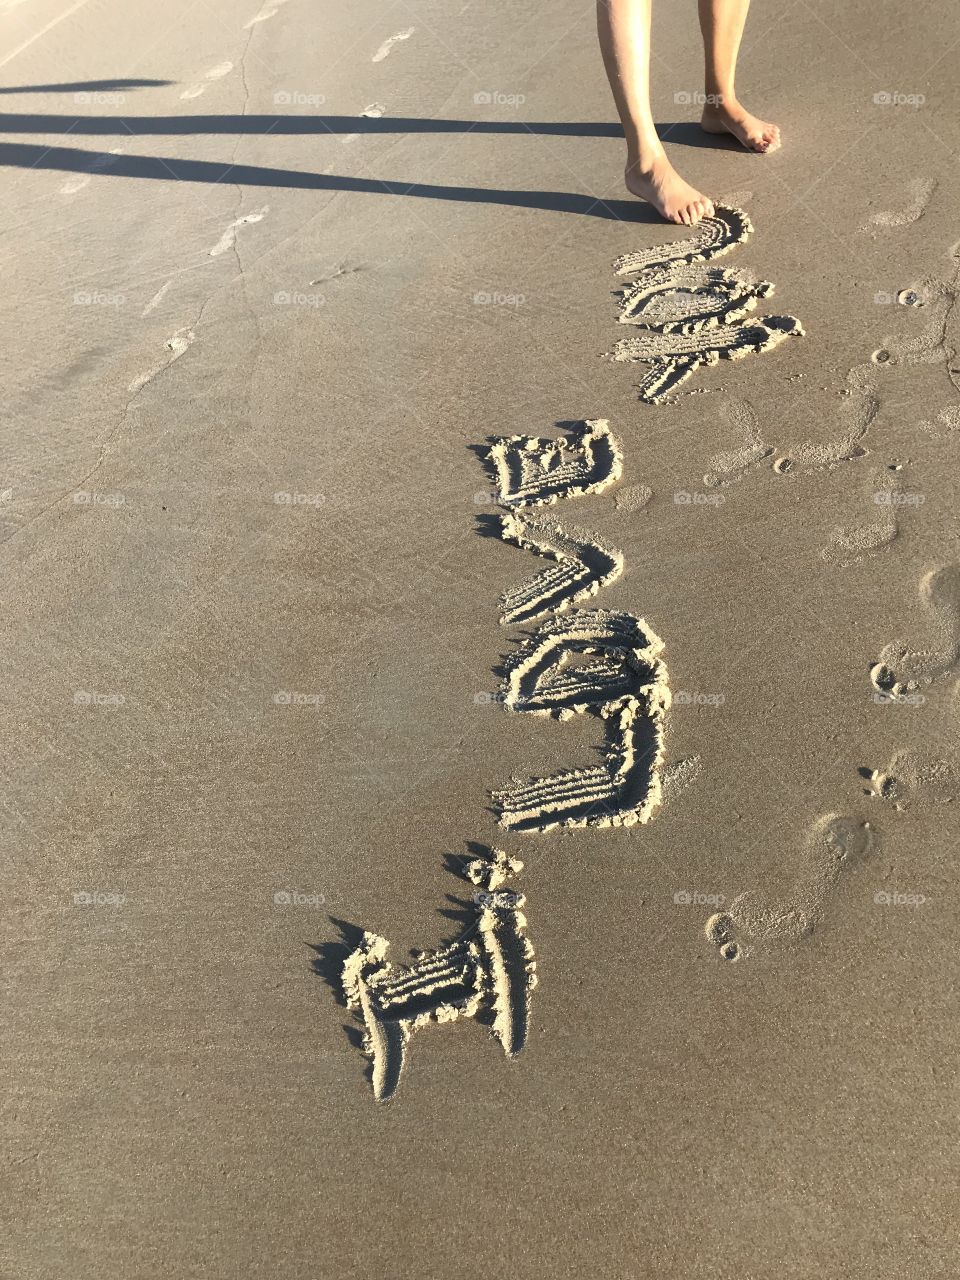 I love you In sand